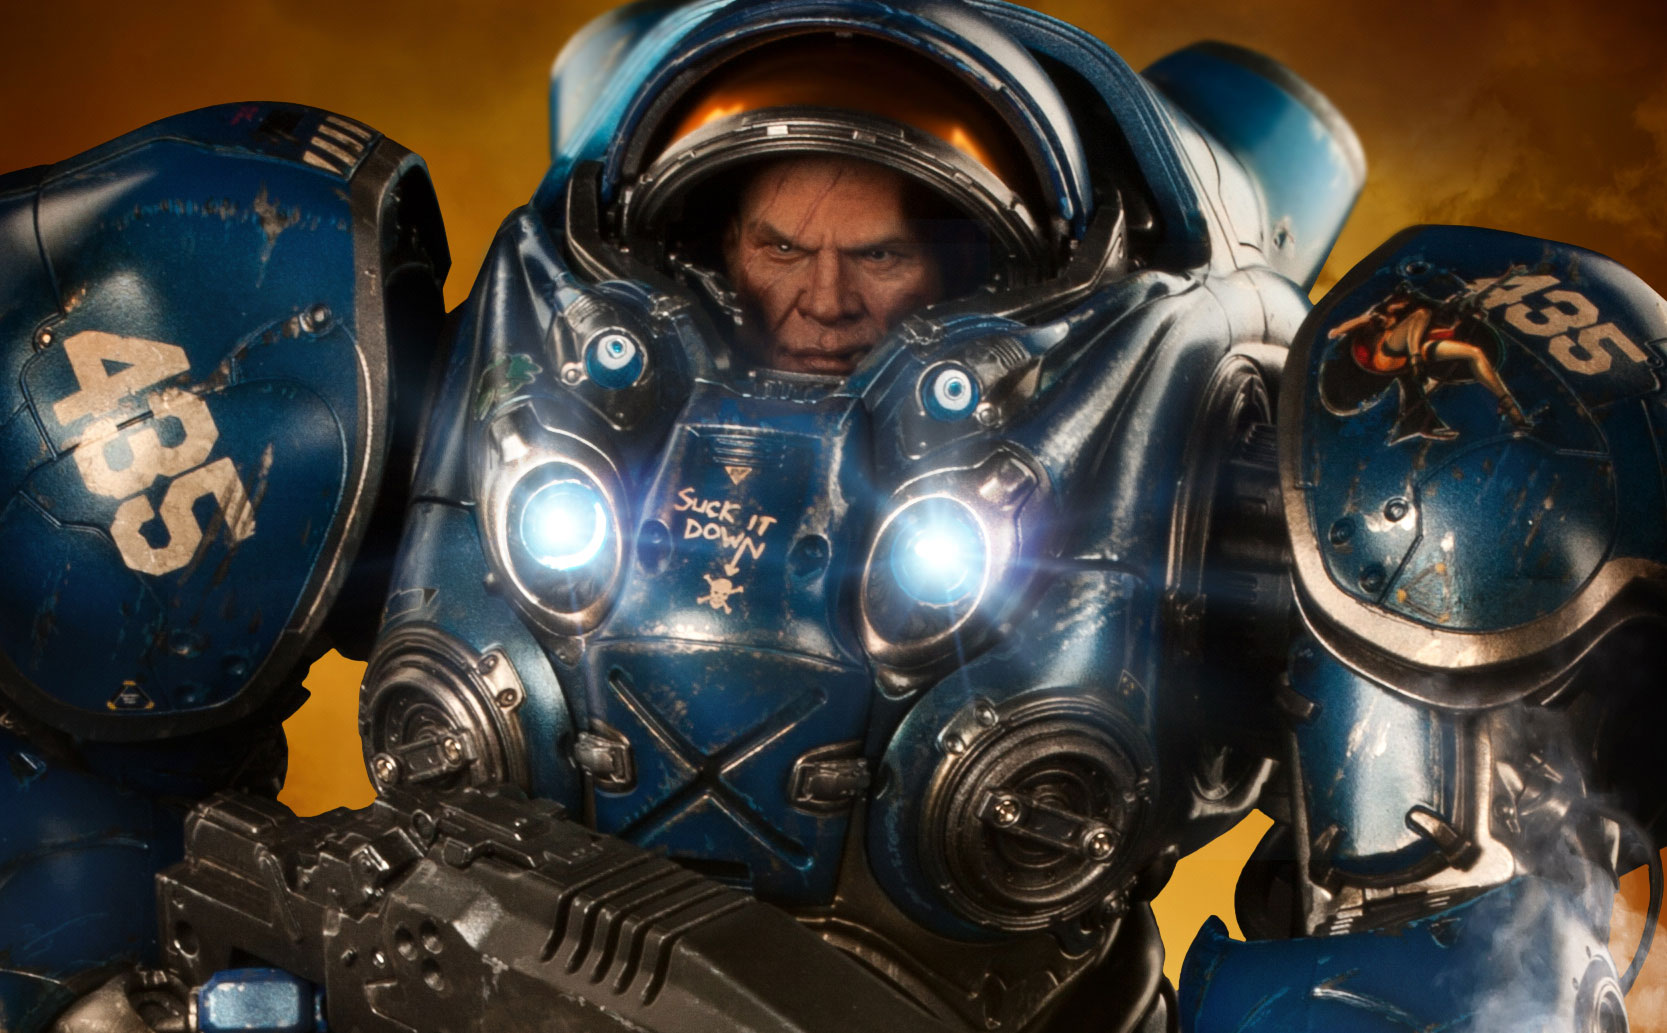 Tychus from Starcraft 2 - one massive figure from Sideshow Collectibles.